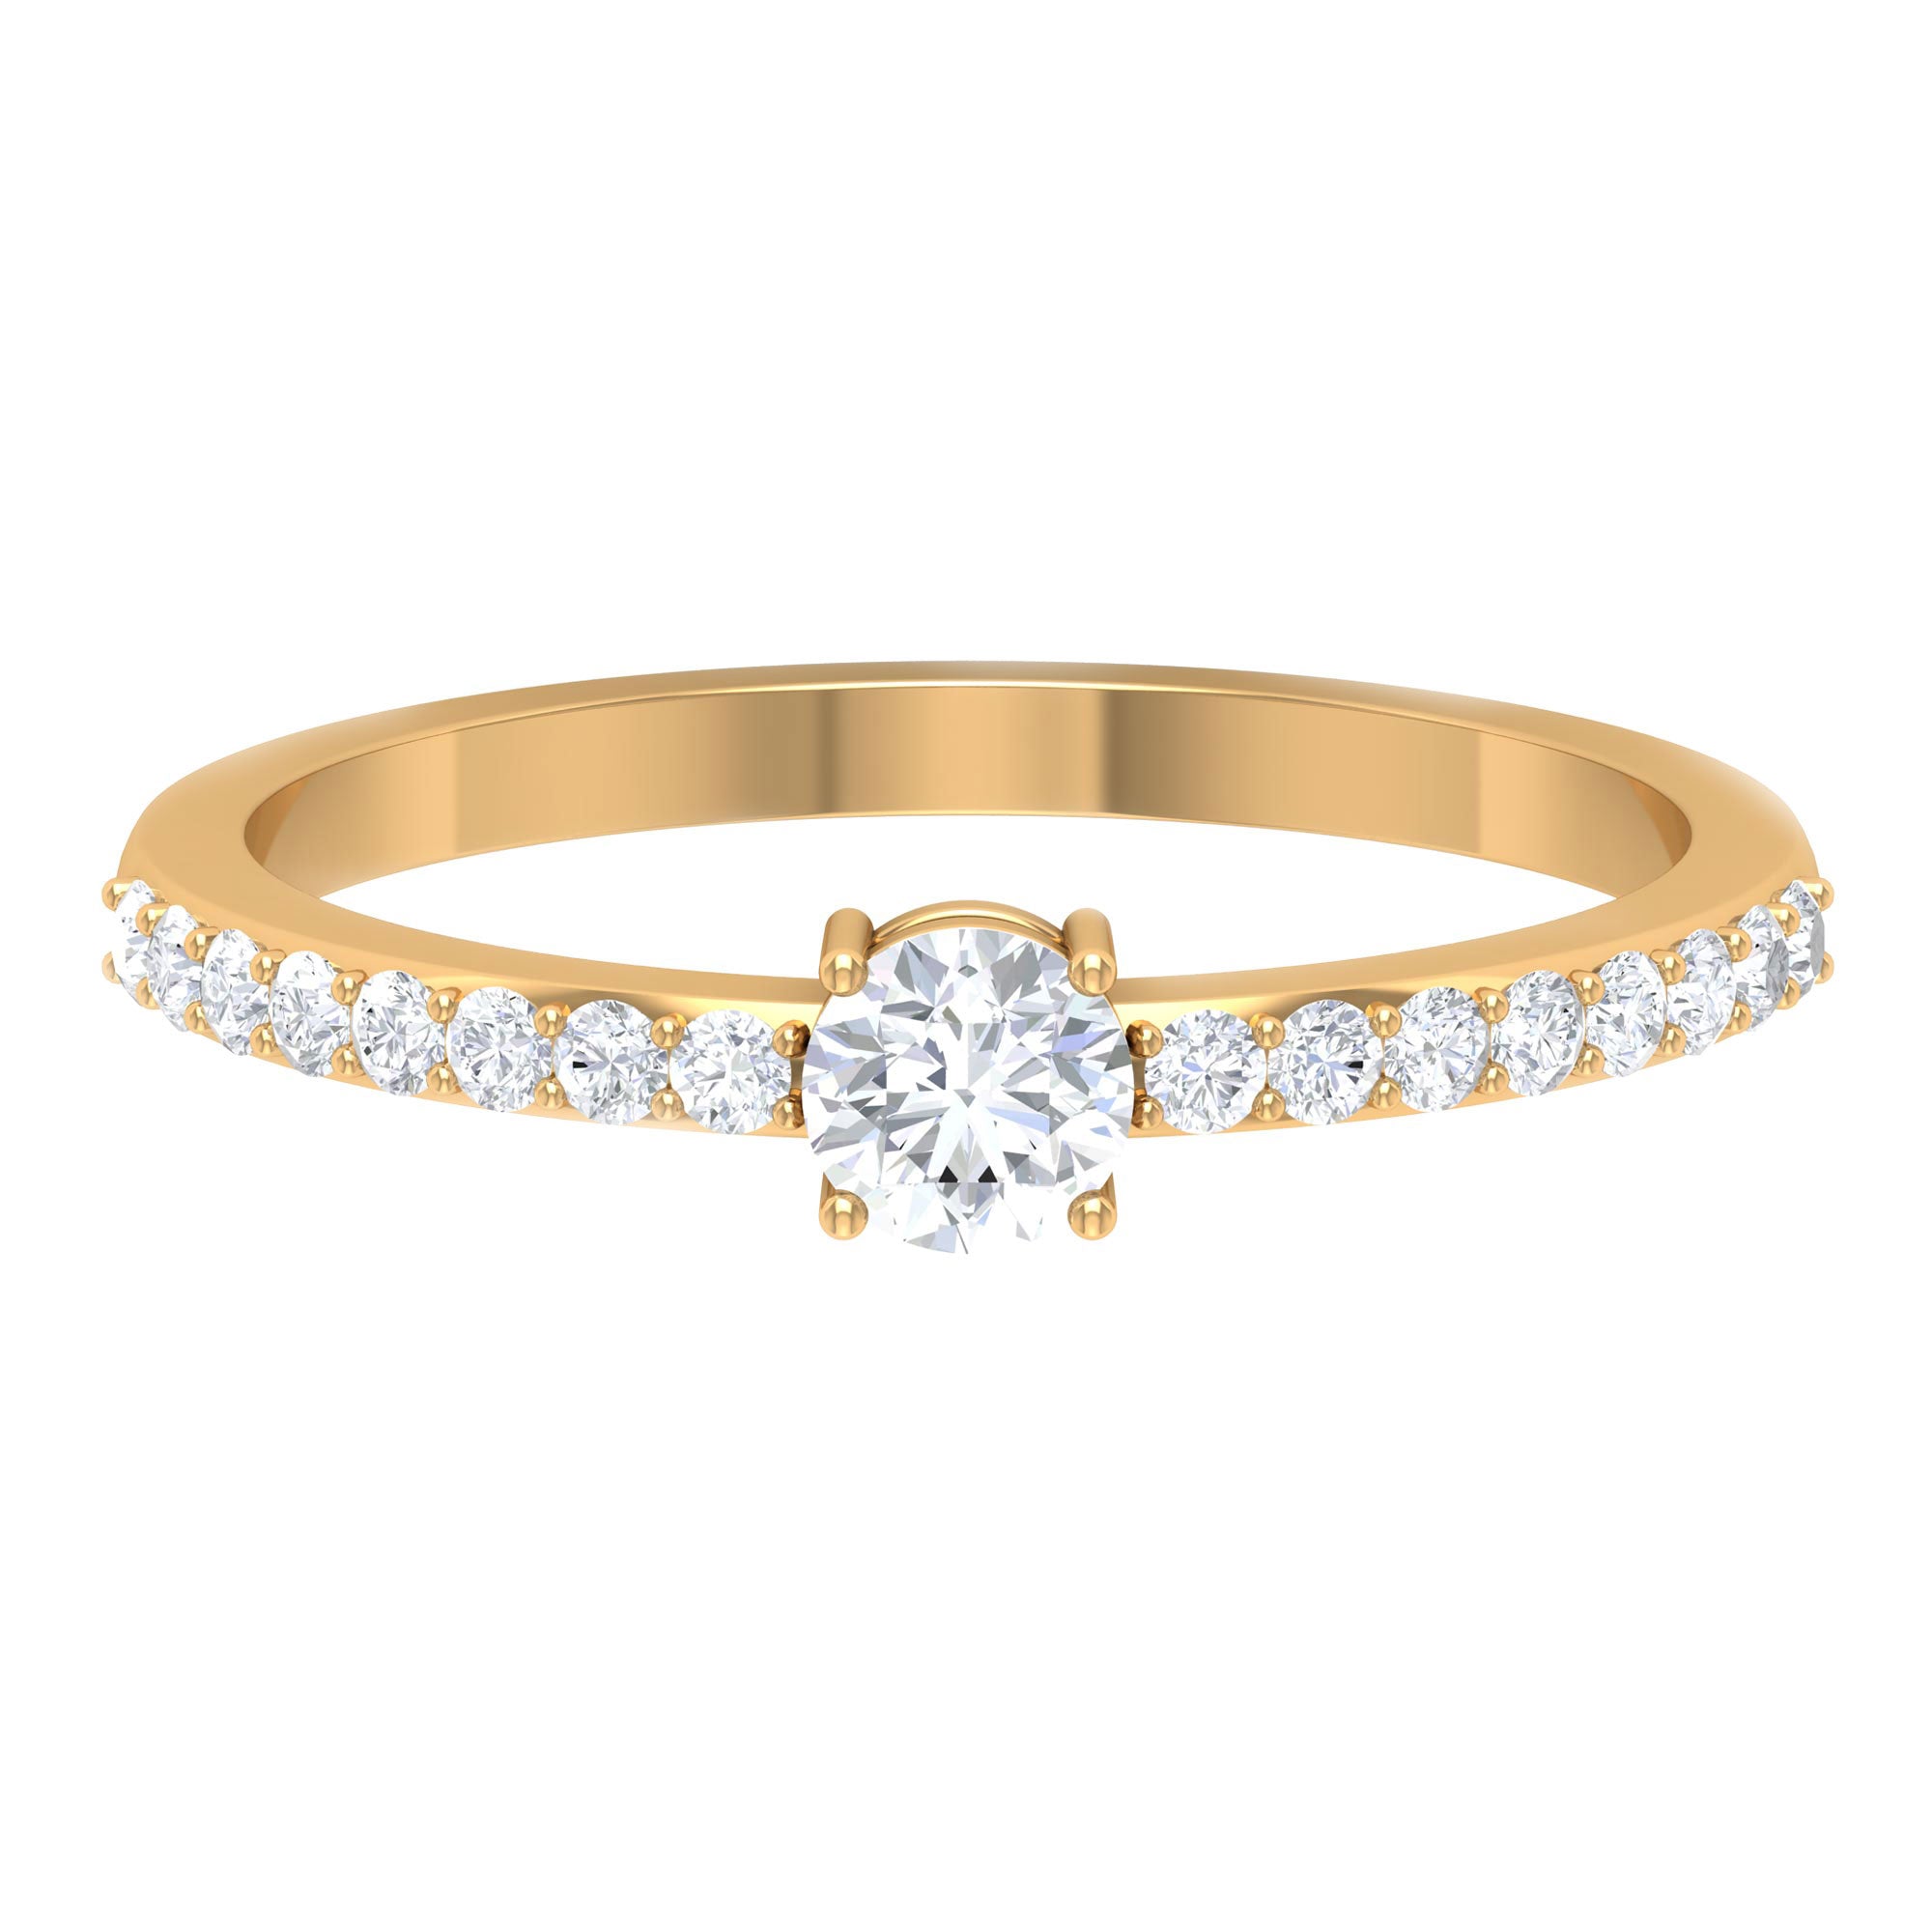 Round Diamond Solitaire Ring with Side Stones Diamond - ( HI-SI ) - Color and Clarity - Rosec Jewels